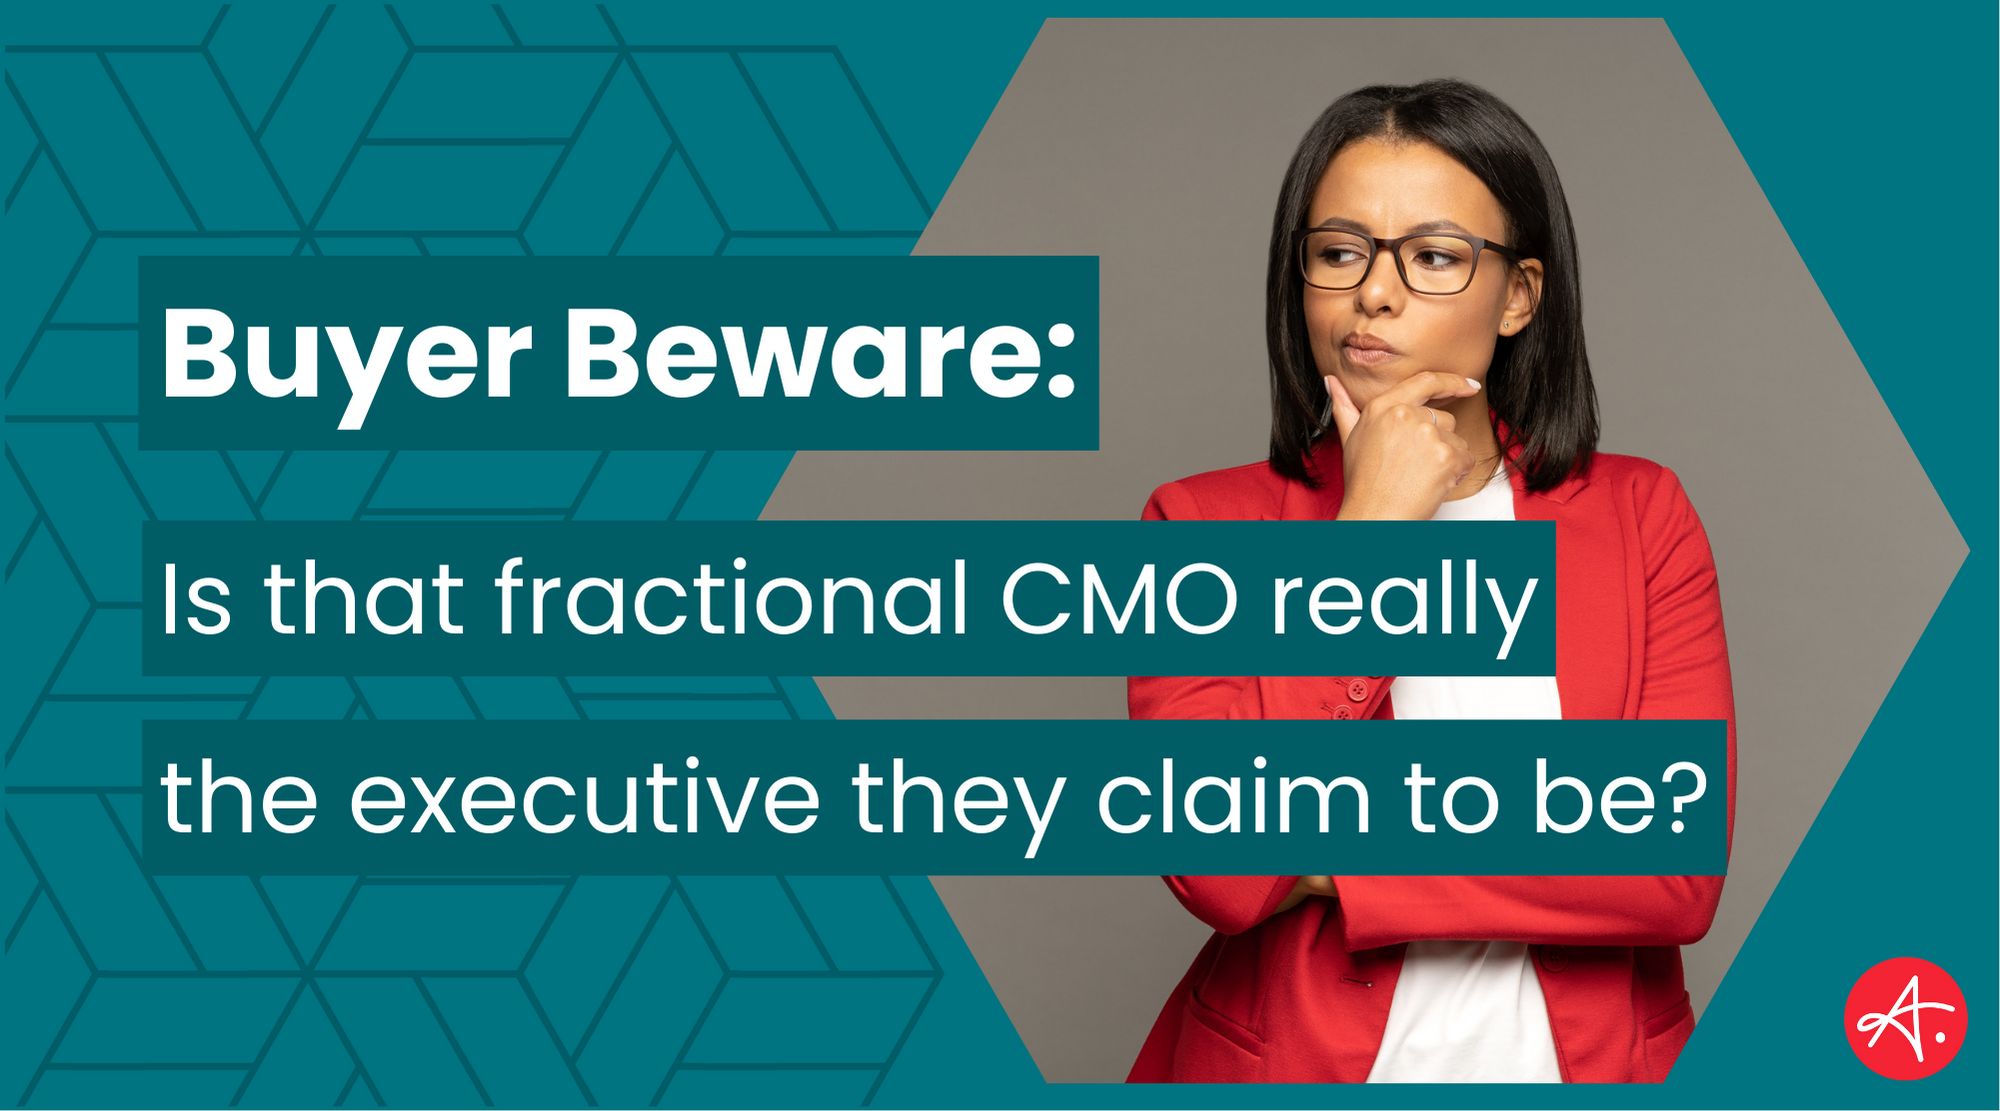 Buyer beware: Is that fractional CMO really the executive they claim to be?